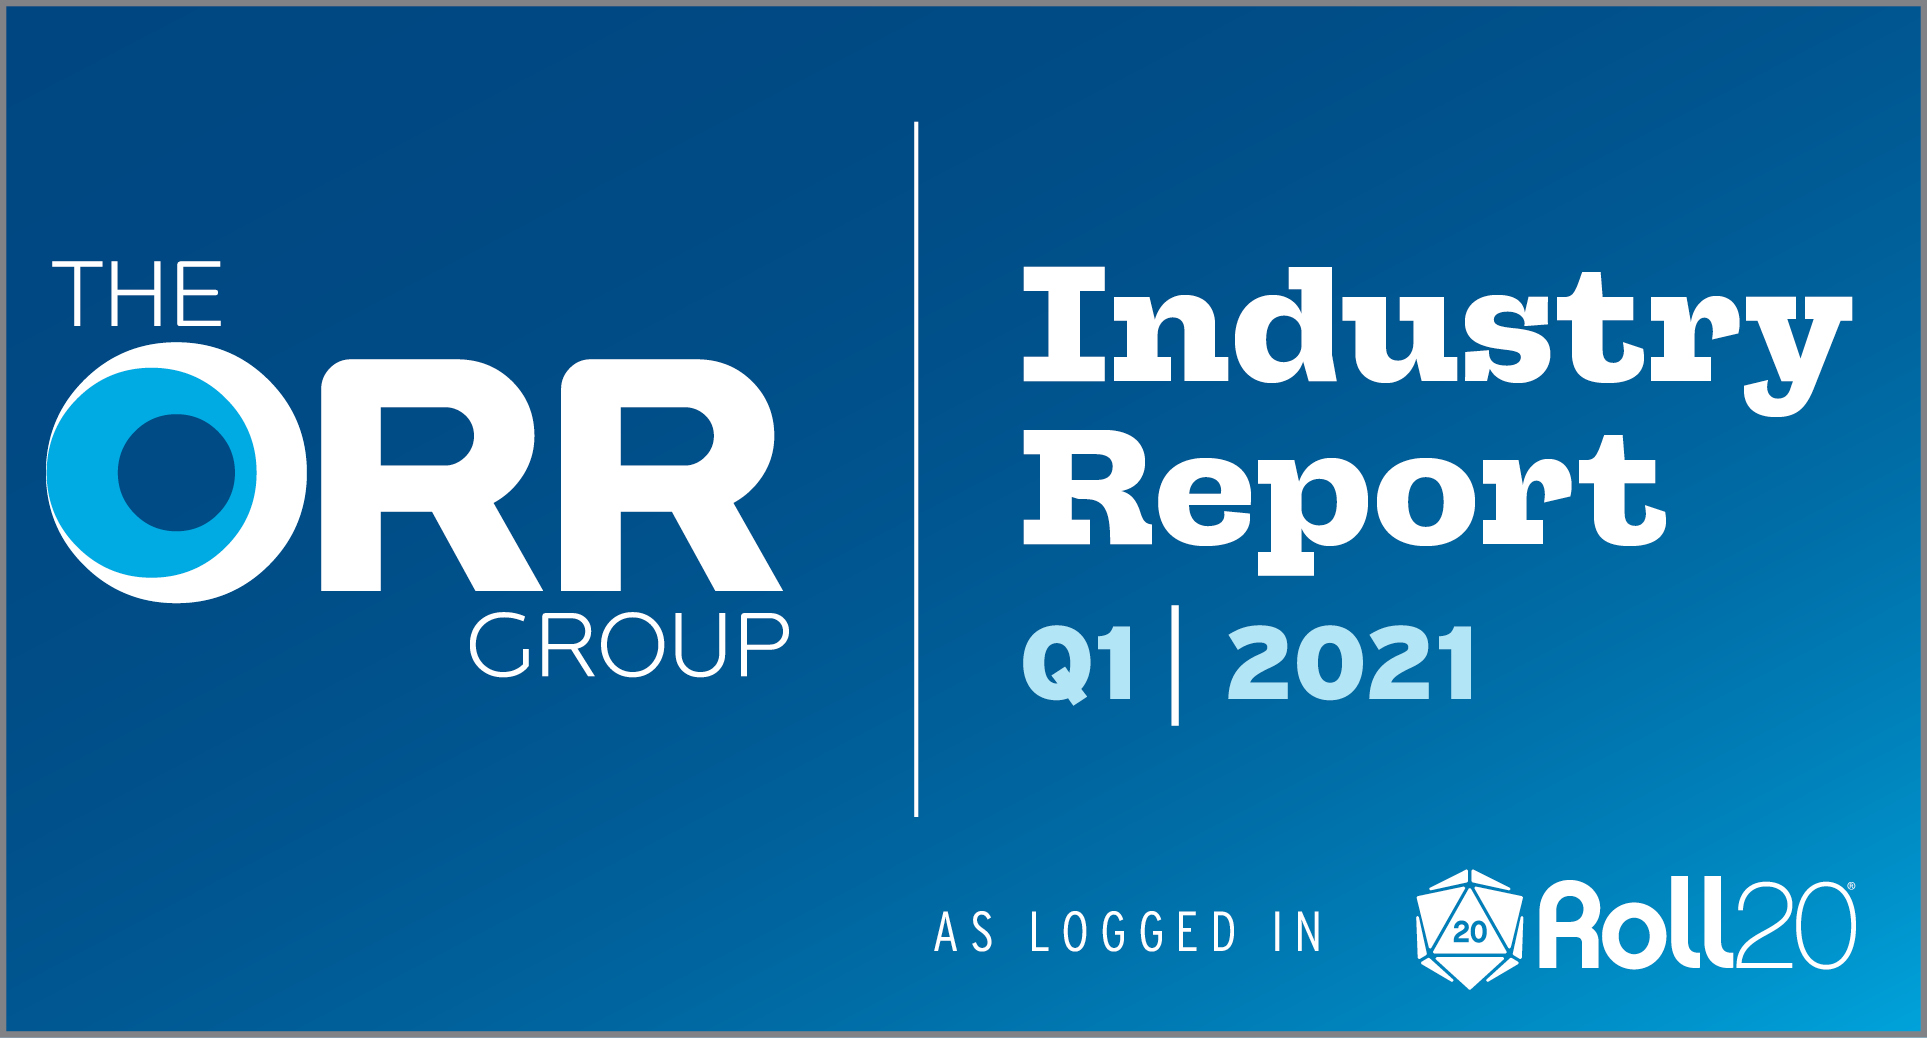 The Orr Group industry Report 2022. Industry report